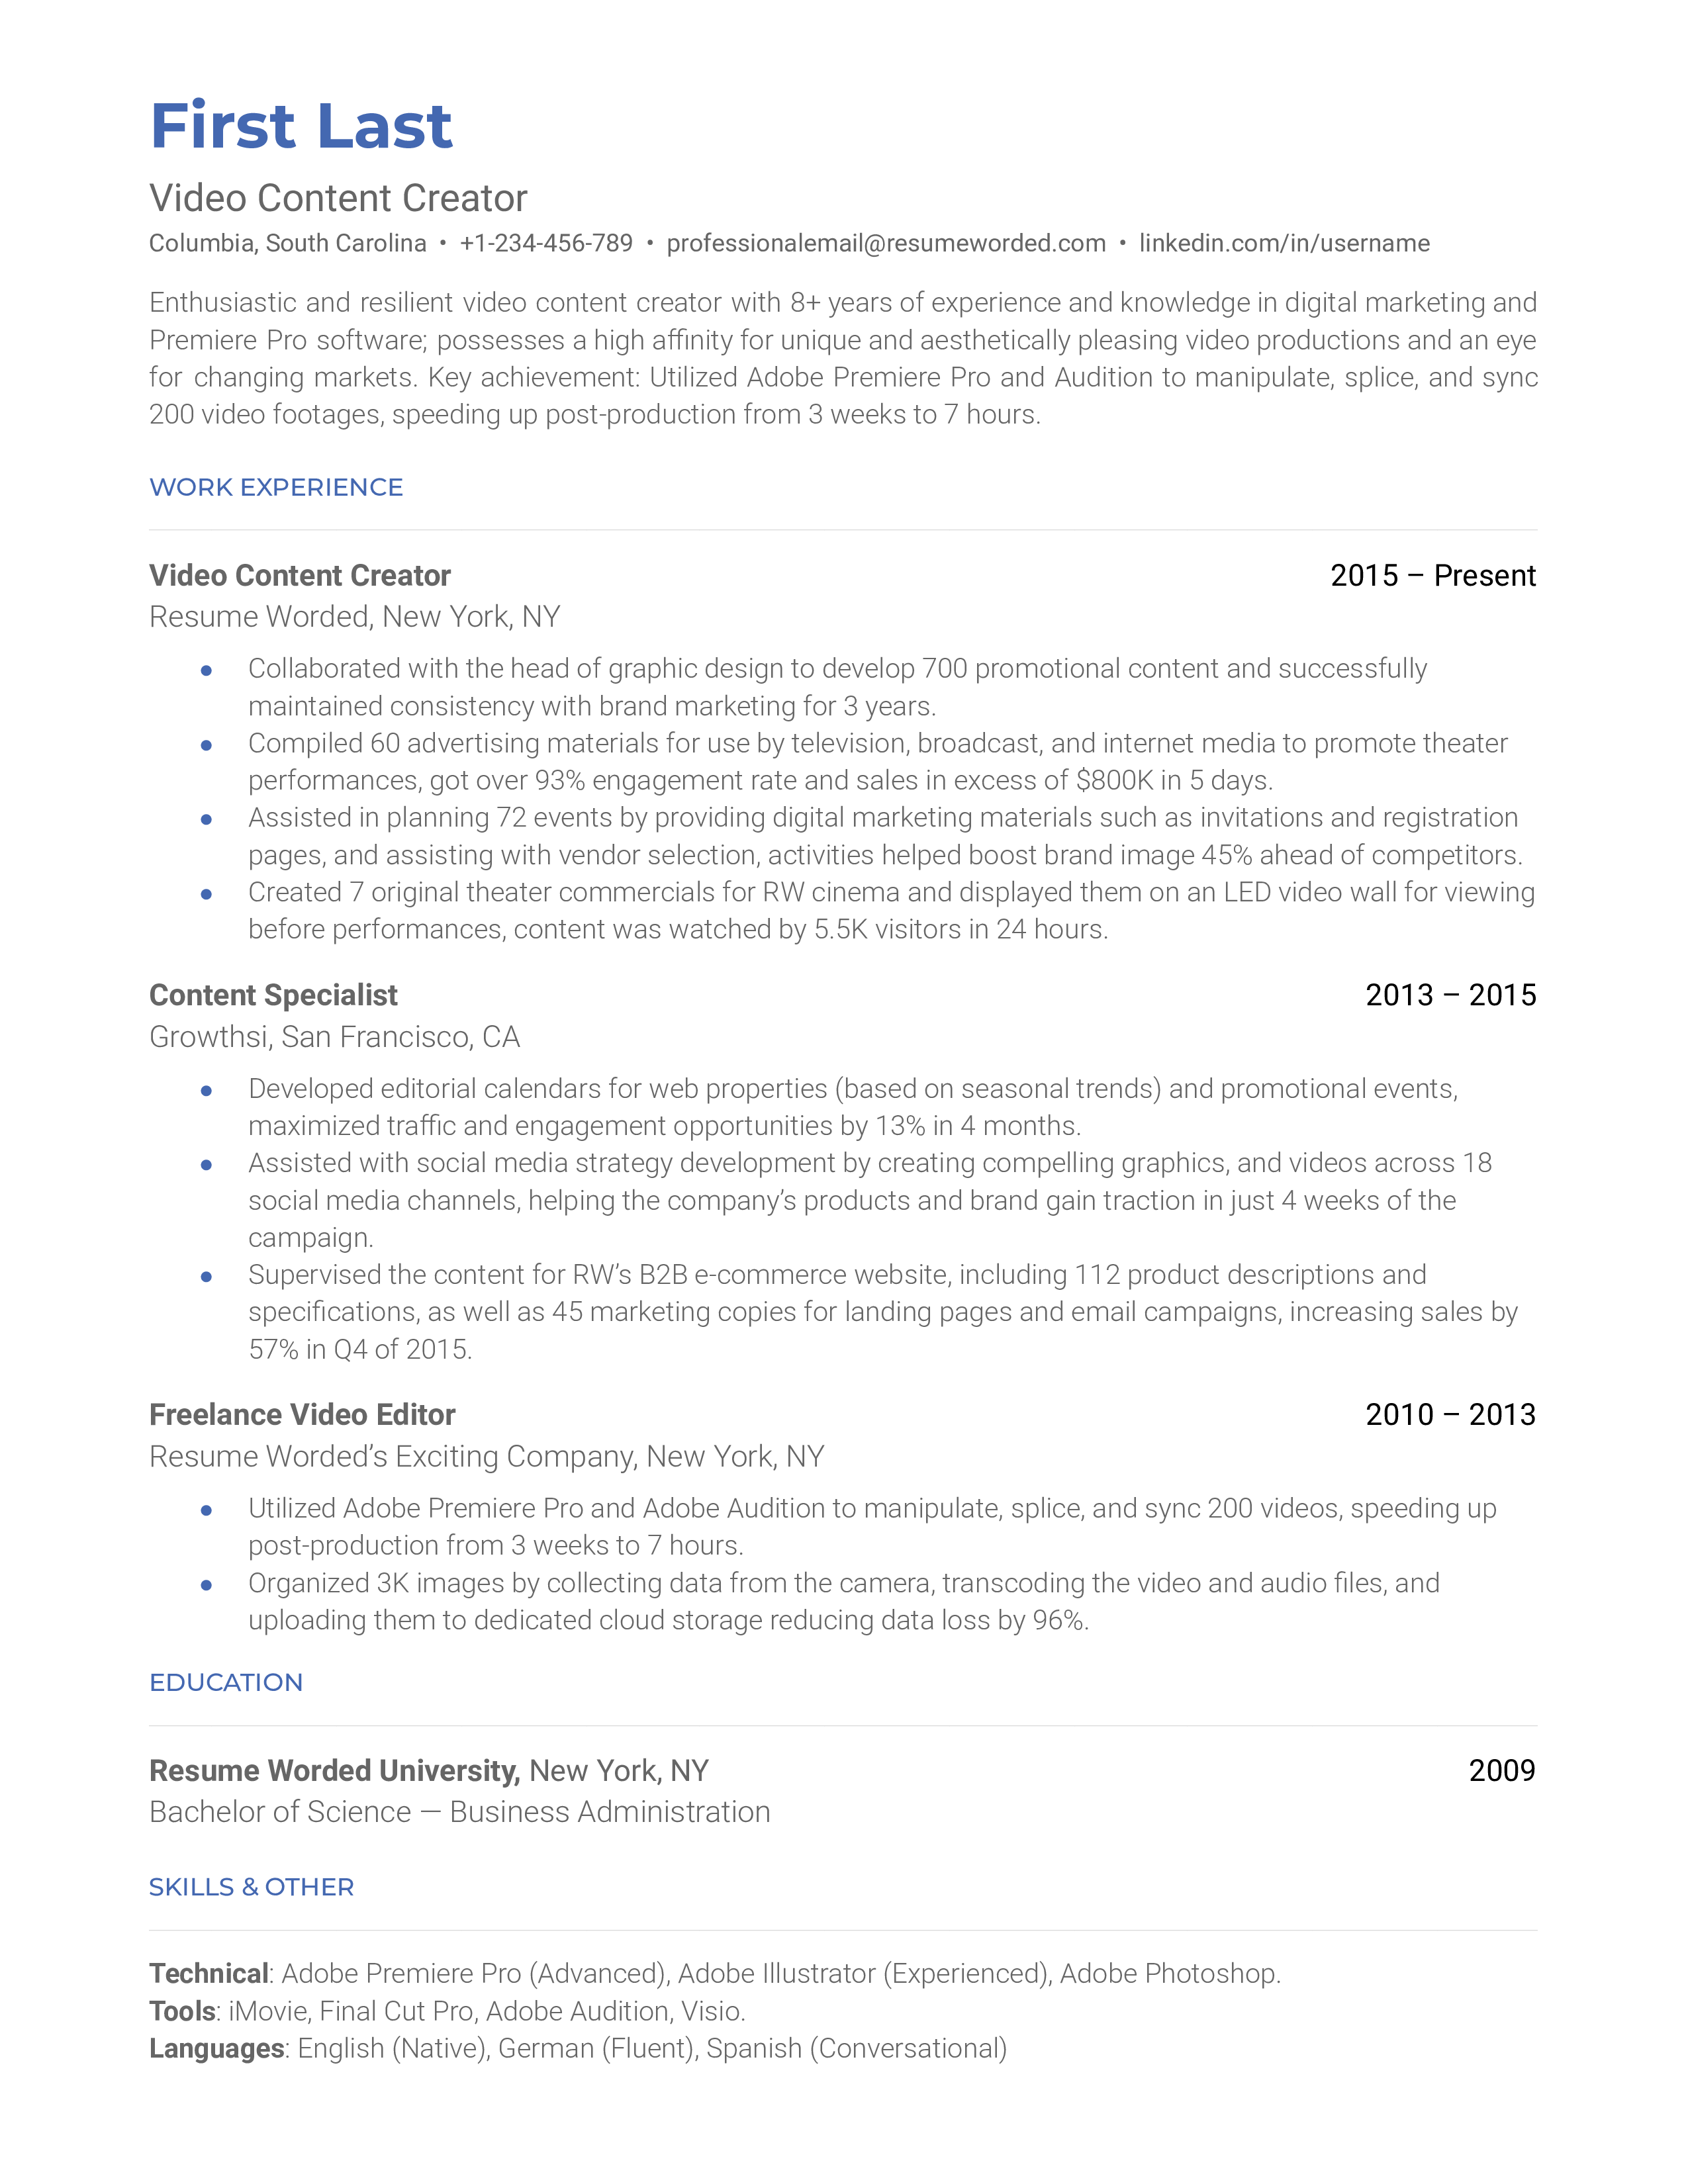 Video Content Creator Resume Template + Example